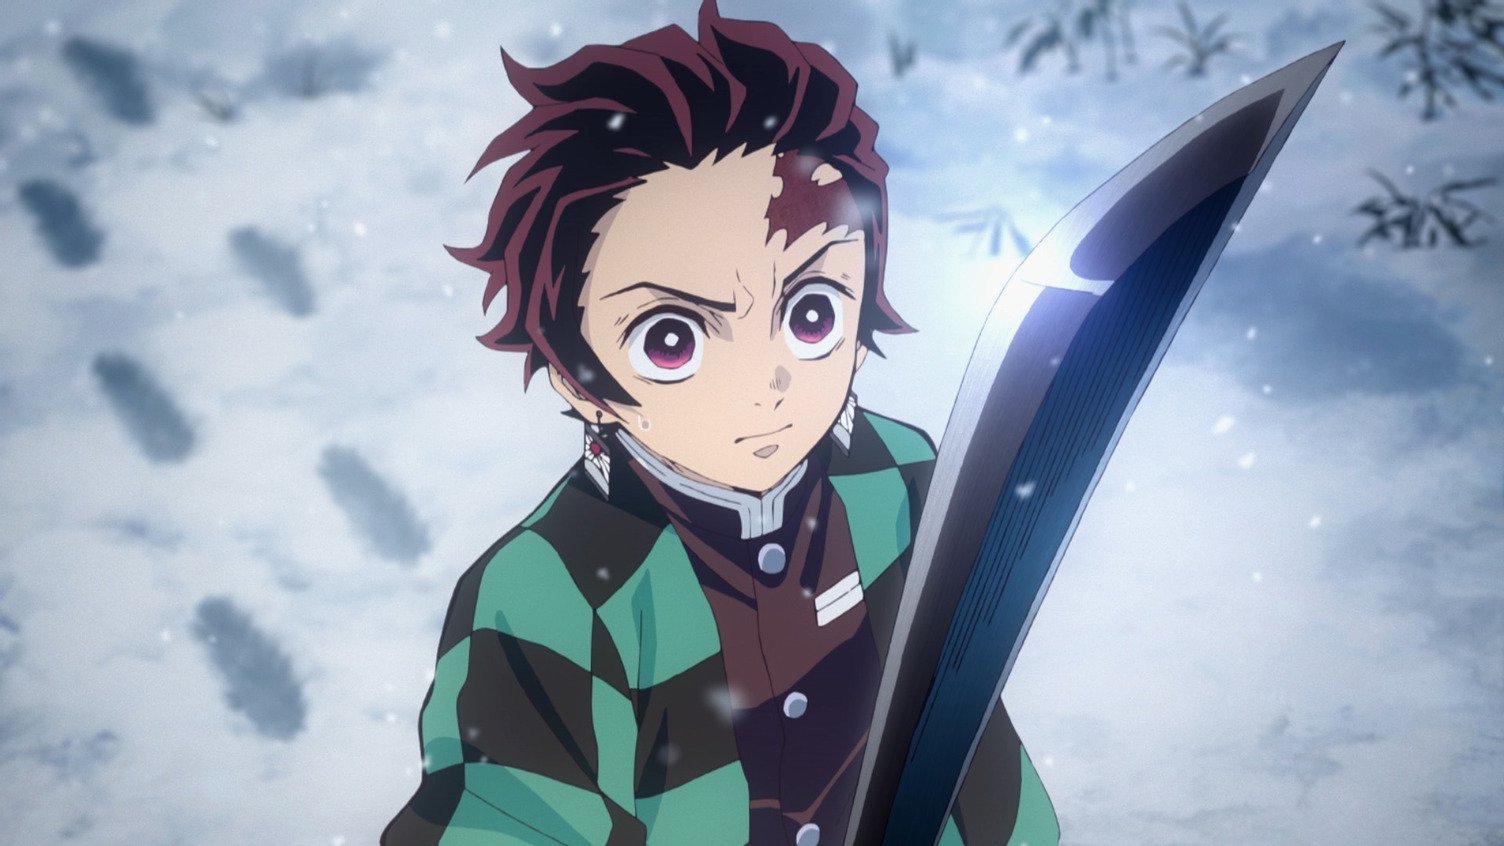 Demon Slayer': How Old Is Tanjiro, and How Does His Age Compare to the Rest  of the Main Characters?